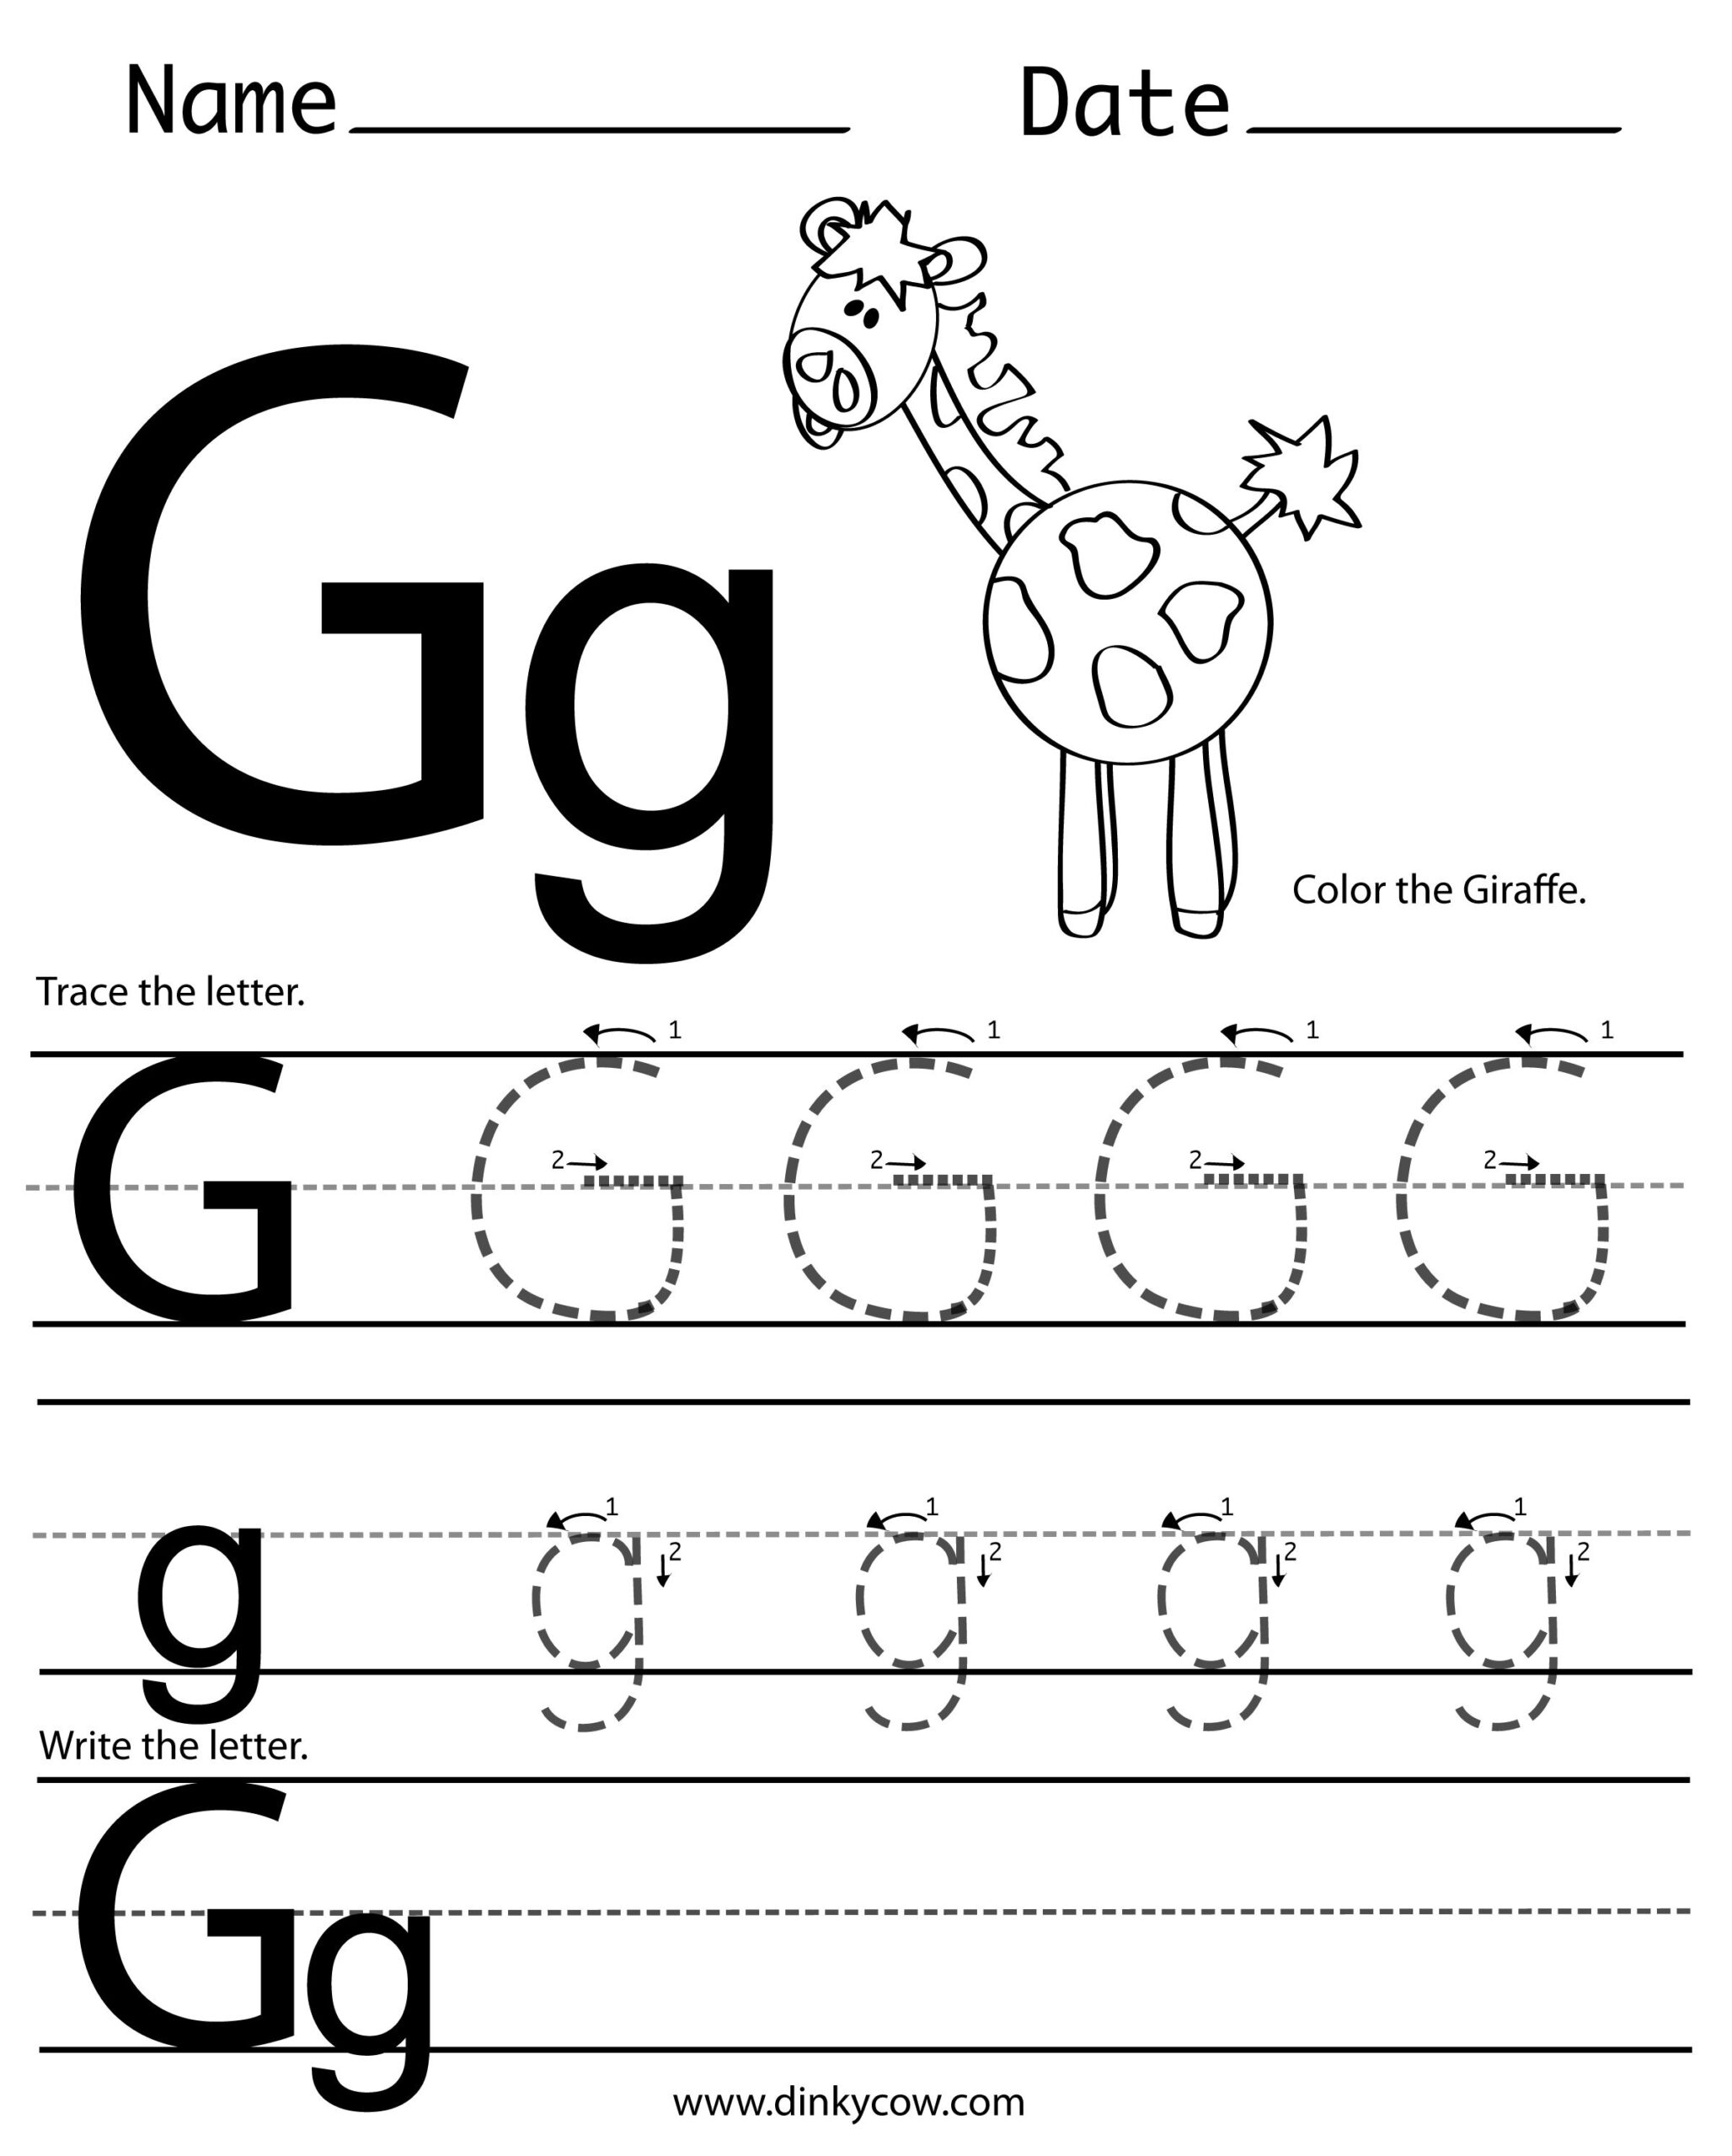 practice-writing-the-letter-g-worksheet-cursive-twisty-noodle-writing